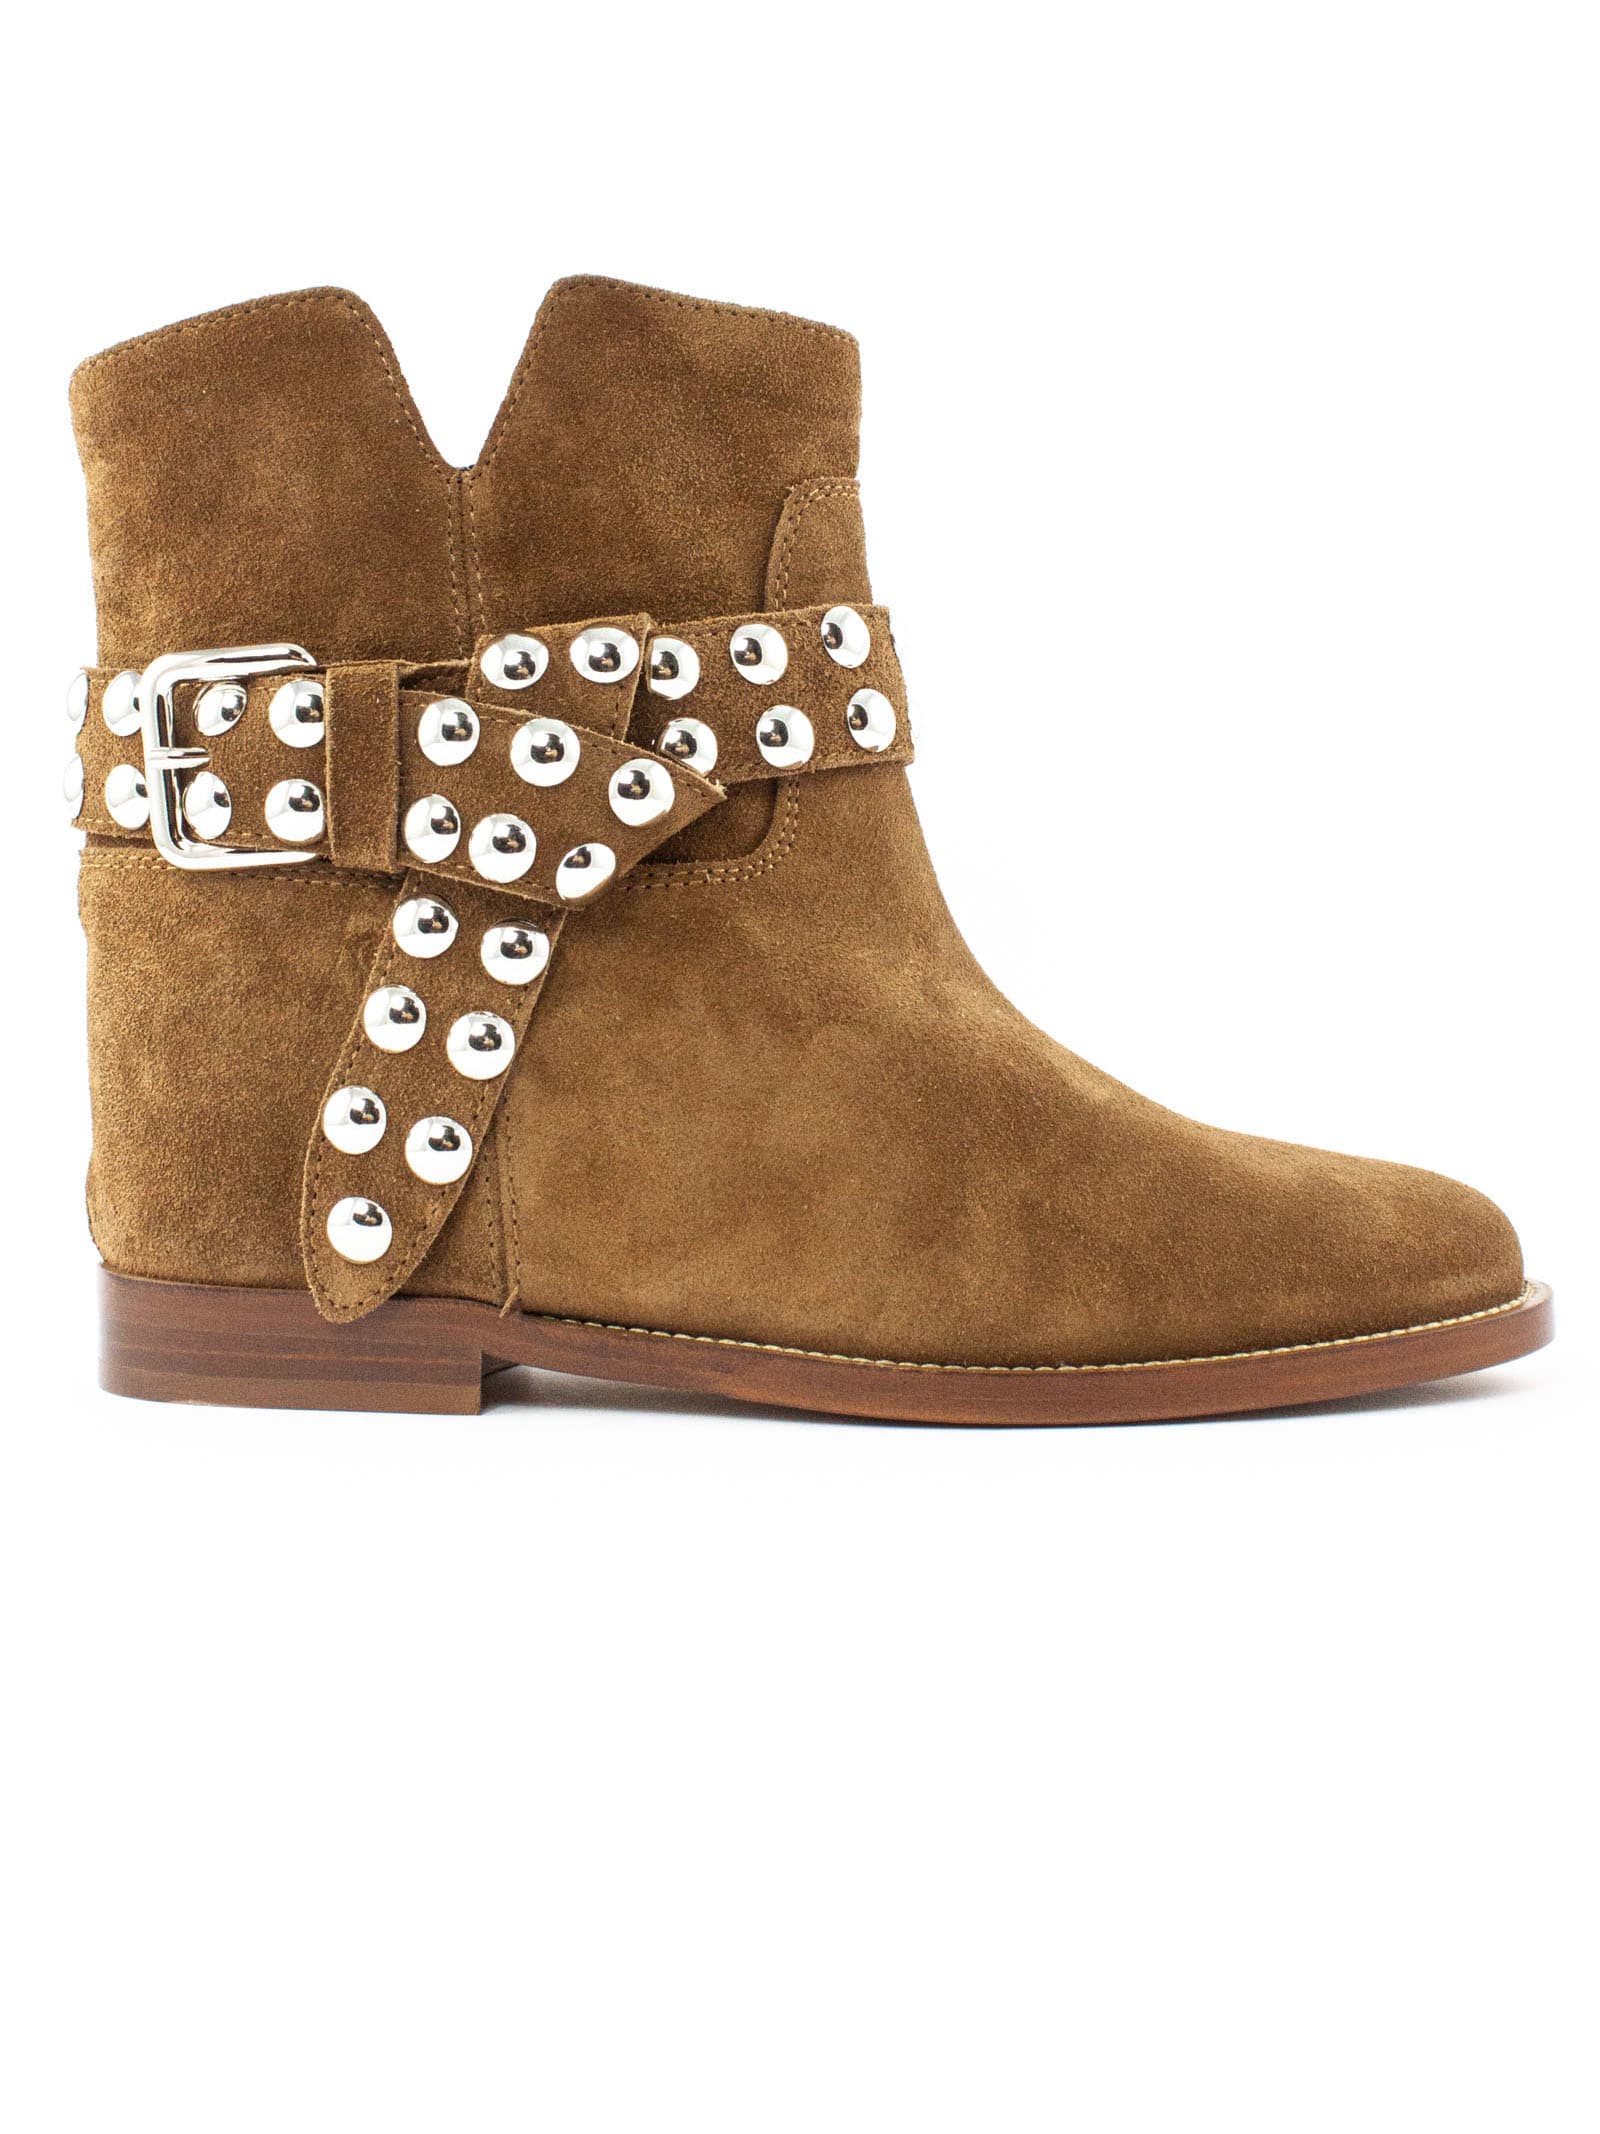 Via Roma 15 Brown Suede Ankle Boot